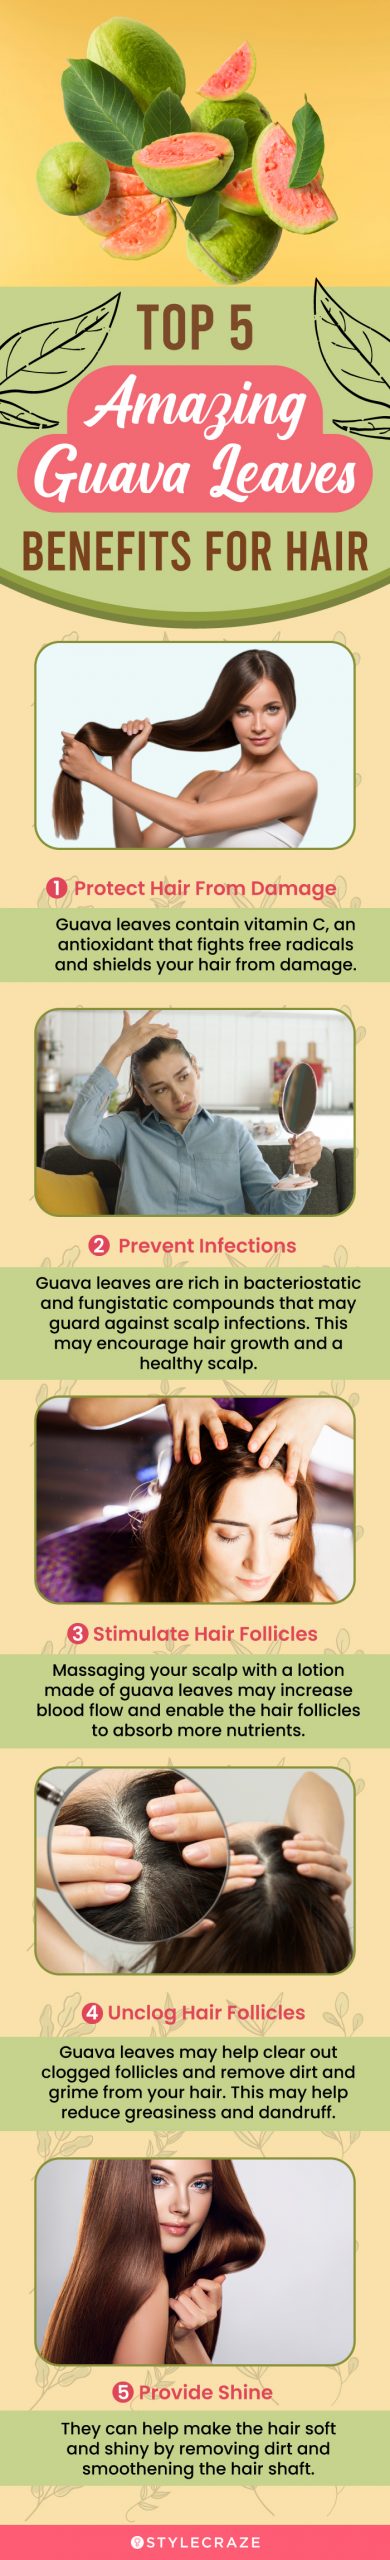 top 5 amazing guava leaves benefits for hair (infographic)